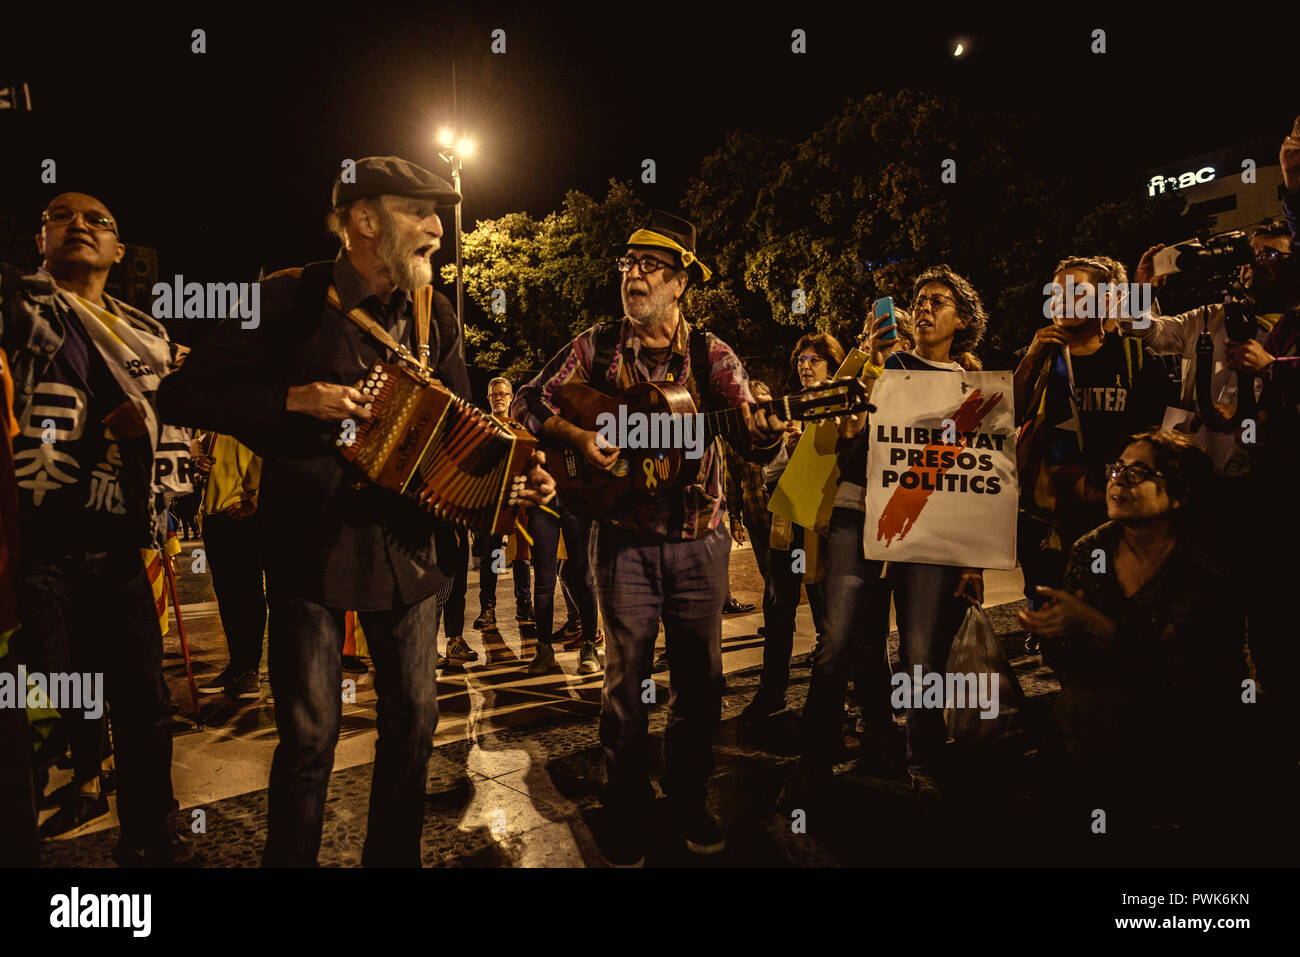 Barcelona, Spain. 16 October, 2018:  Catalan separatists demand 'freedom for the political prisoners' singin songs the day marking 1 year of imprisonment of former president of the ANC, Jordi Sanchez, and former president of Omnium Cultural, Jordi Cuixart, facing accusations over rebellion and sedition in relation with a banned referendum on secession and the independence vote at the Catalan Parliament in October 2017. Credit: Matthias Oesterle/Alamy Live News Stock Photo